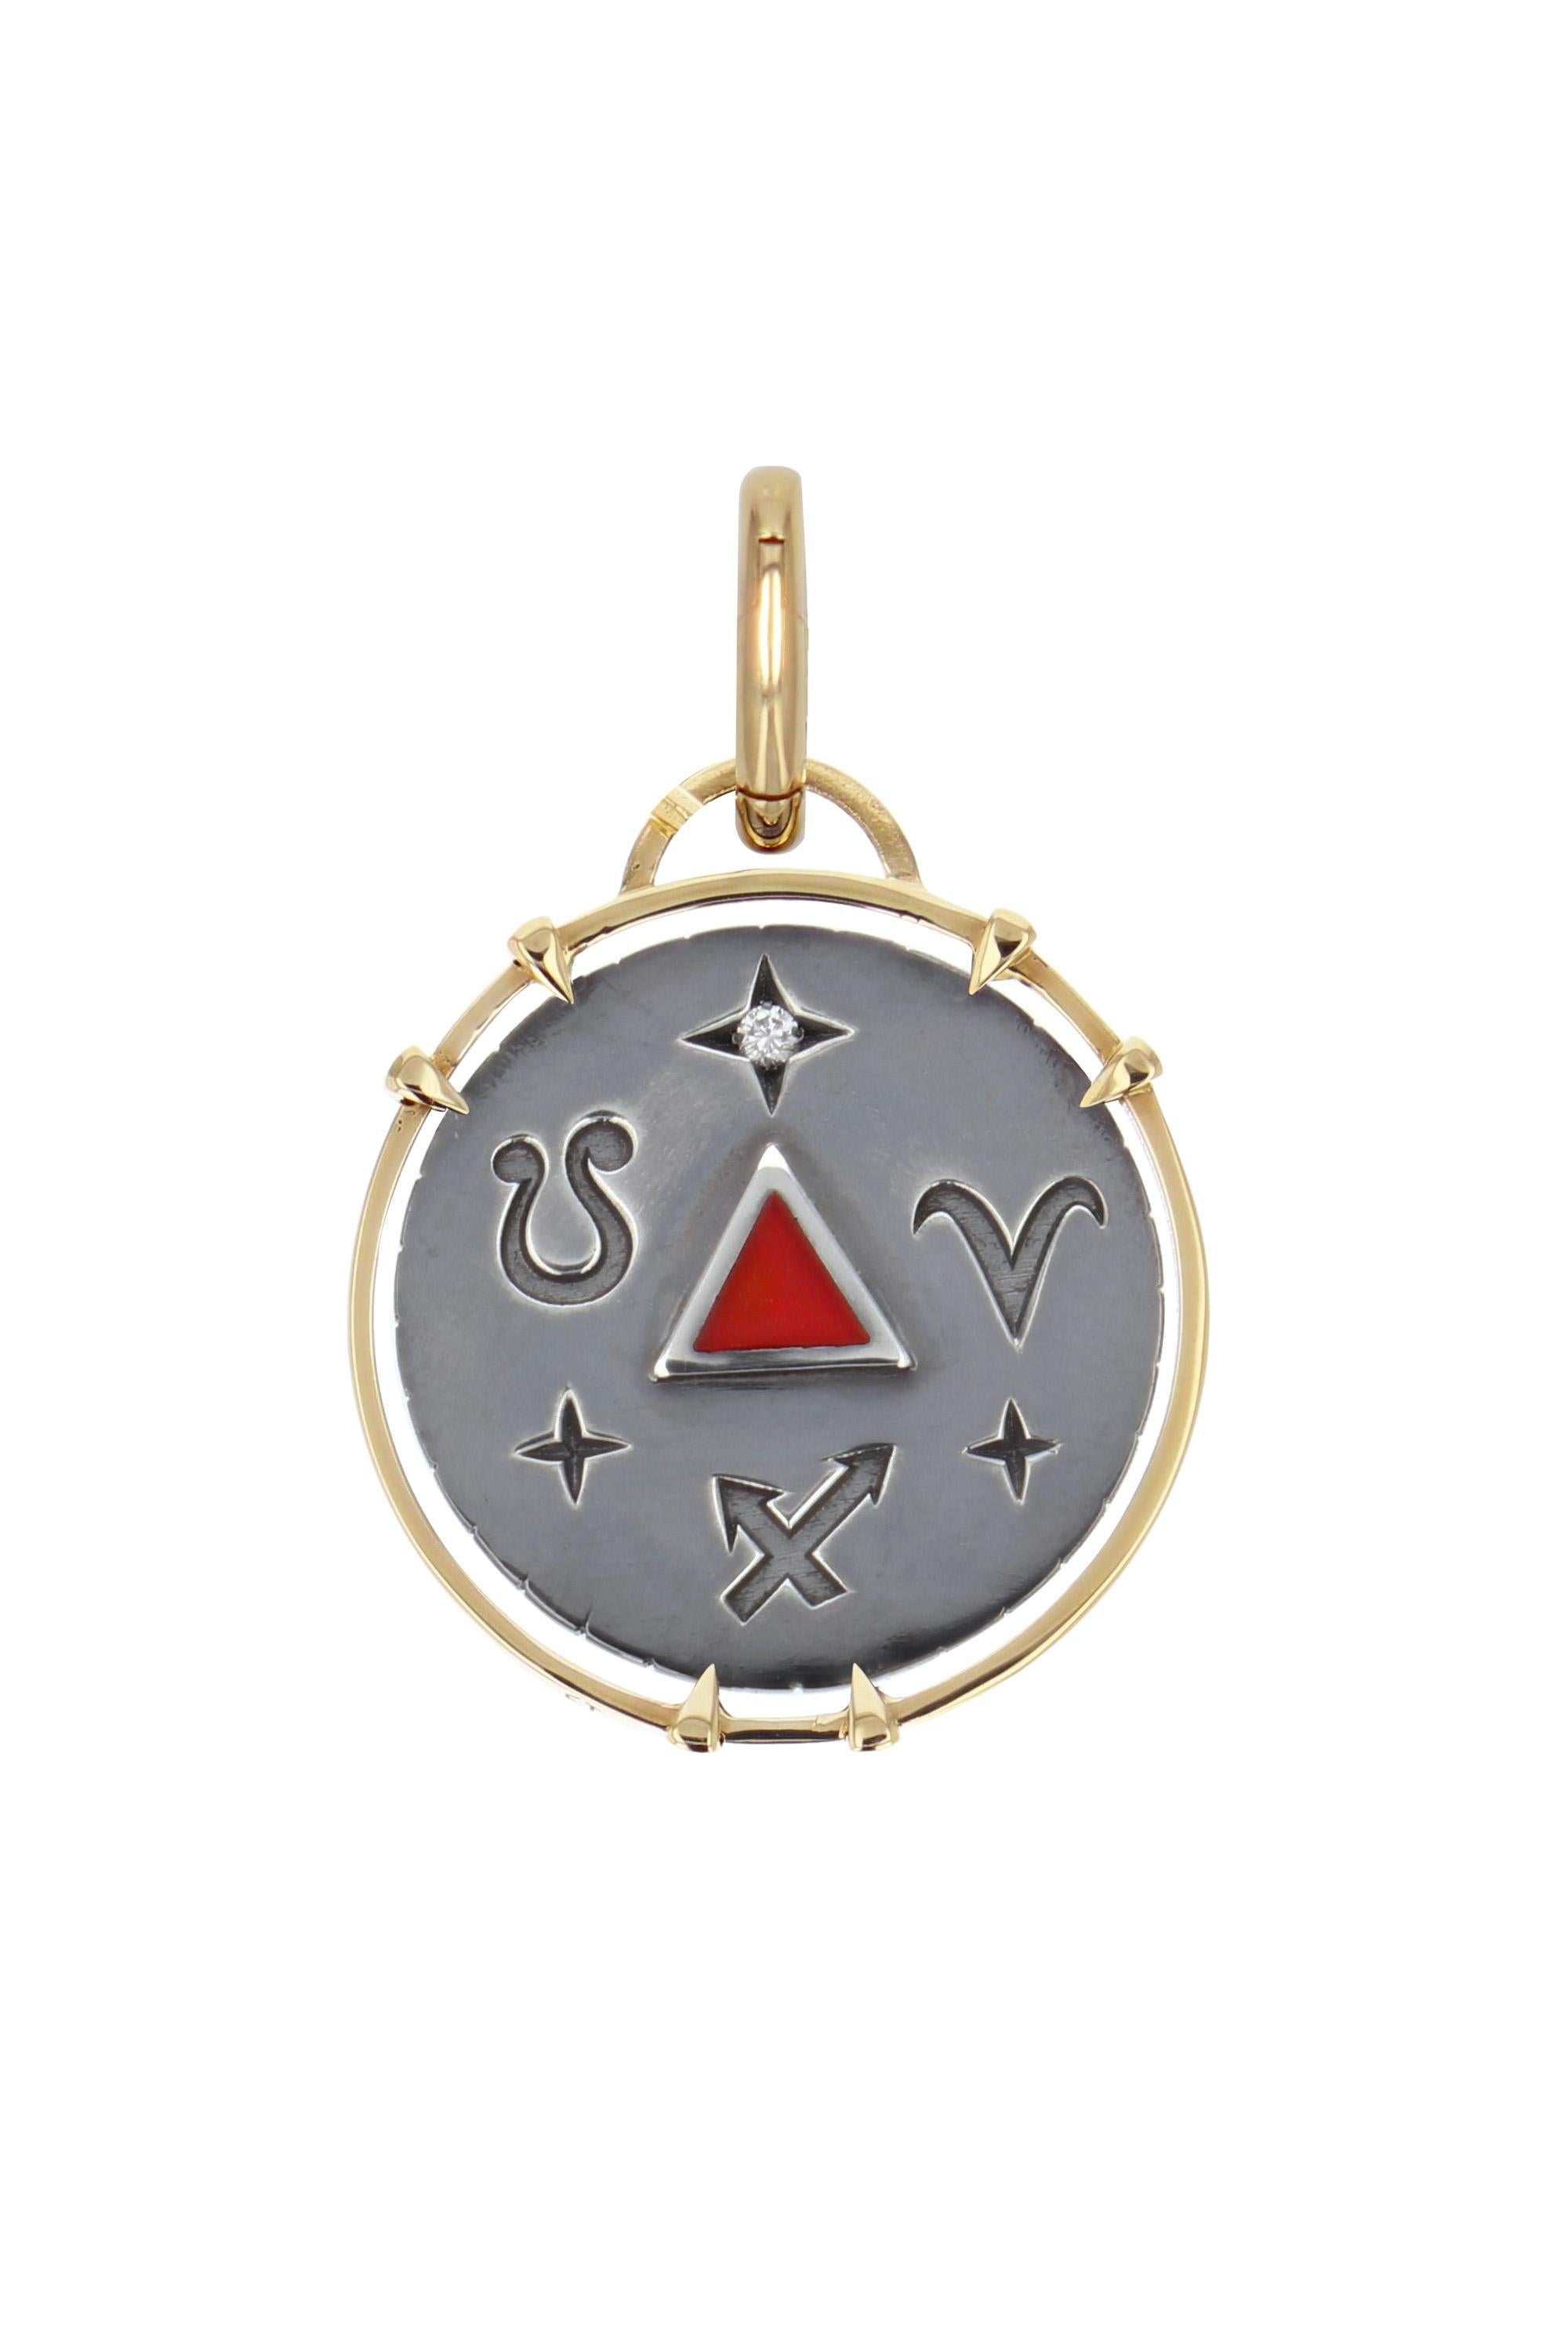 Yellow gold and distressed silver charm. Studded with a diamond, the charm embraces all the symbols linked to the Fire sign with a gold clover on its front and the alchemy triangle surrounded by its zodiac signs  (Sagittarius, Leo, Aries) on its